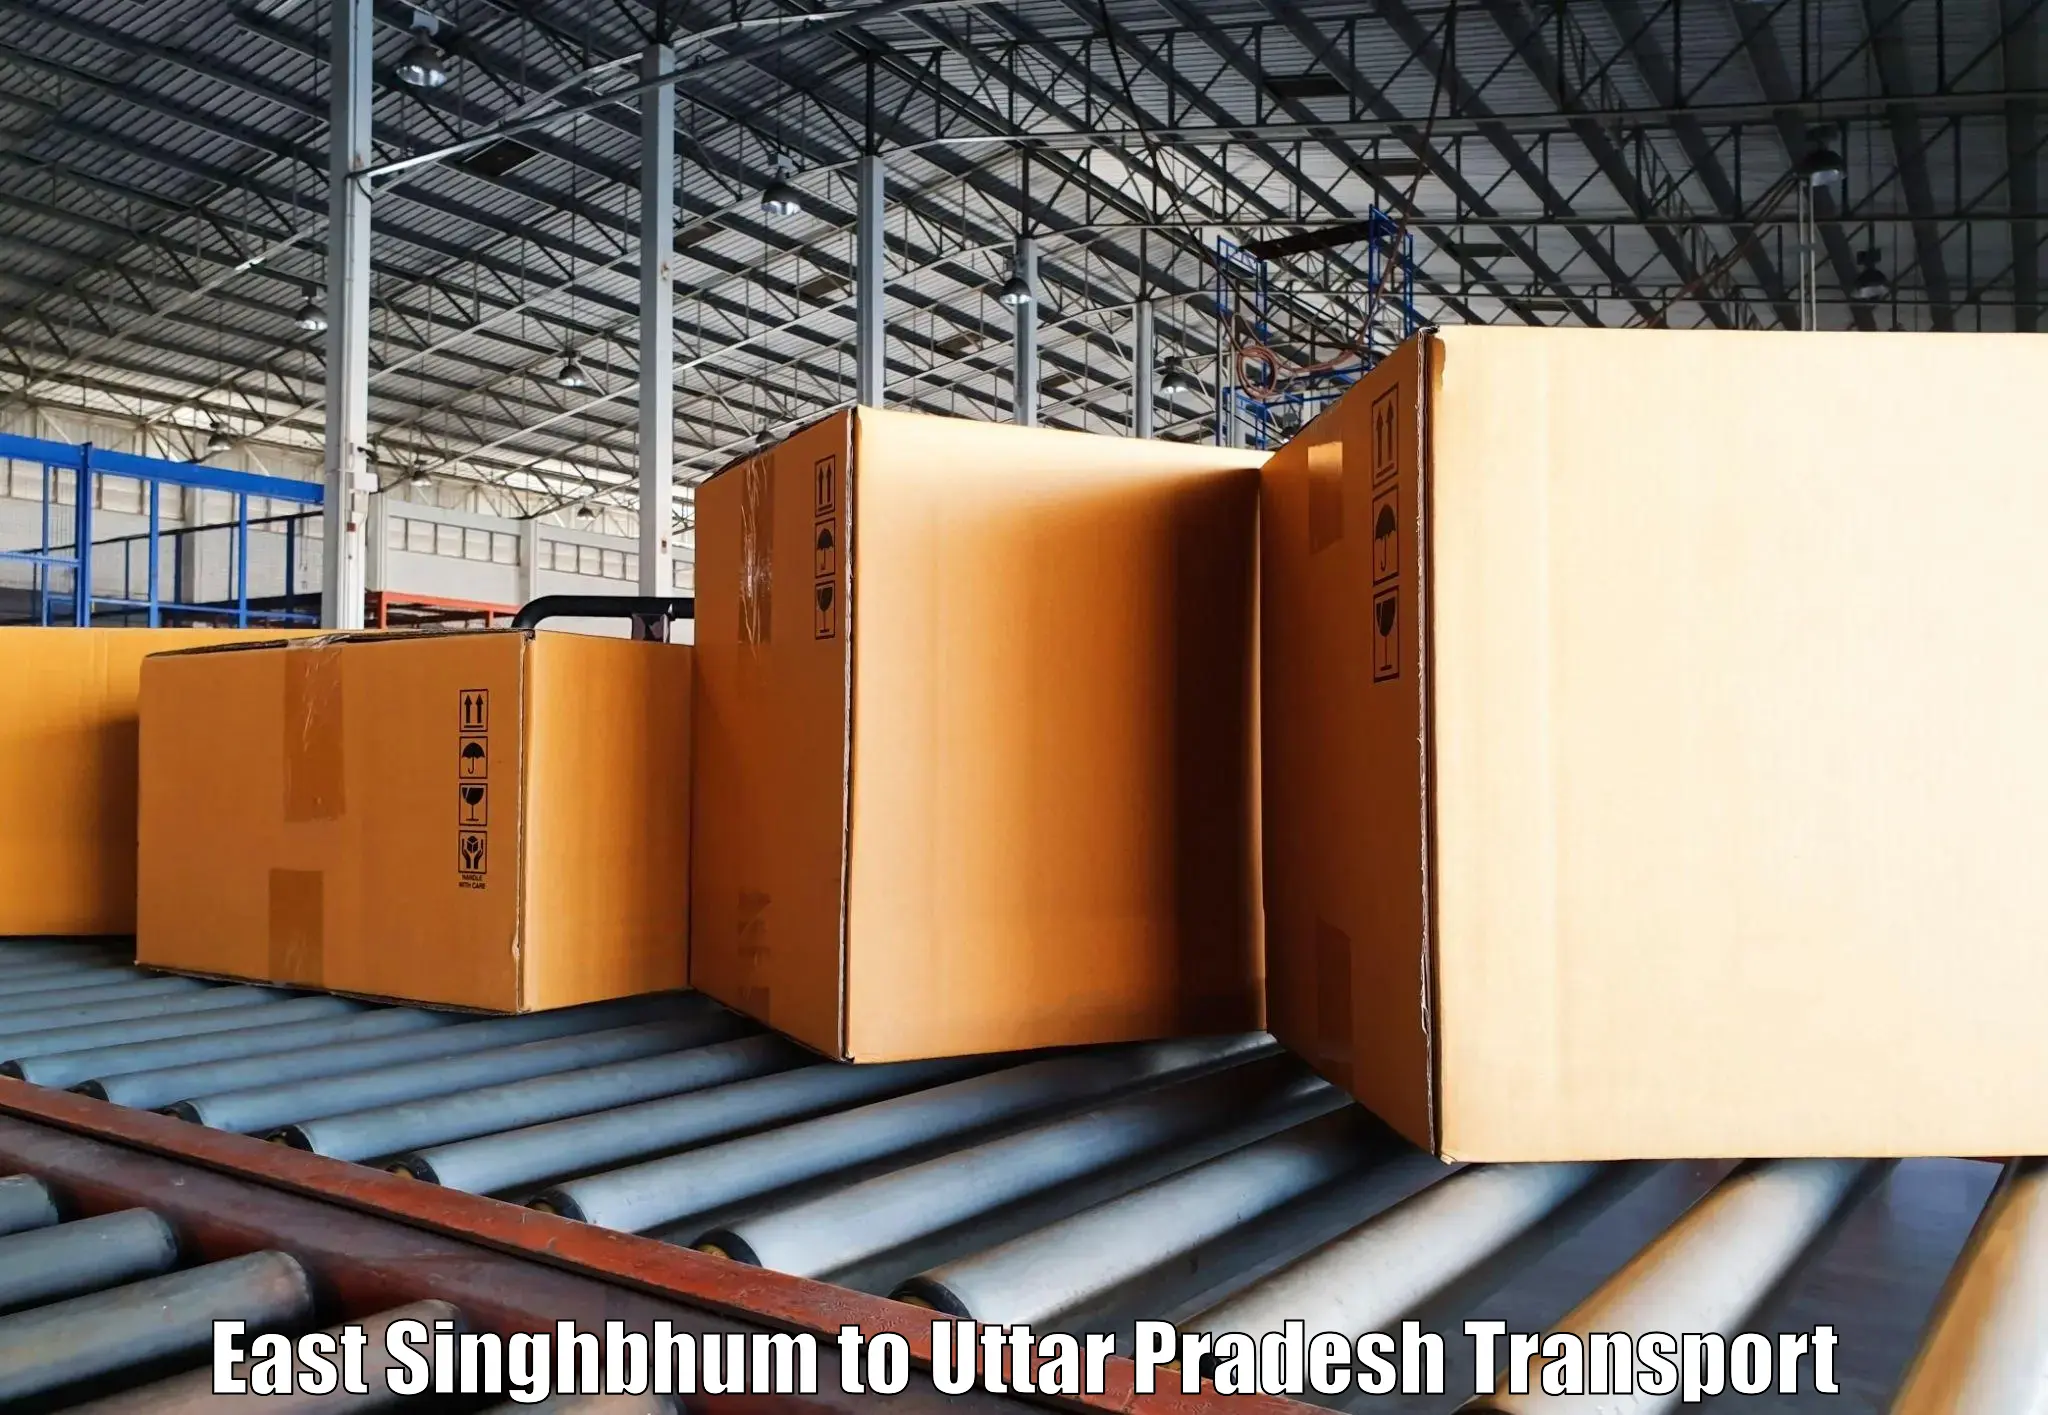 Cargo train transport services East Singhbhum to Dostpur